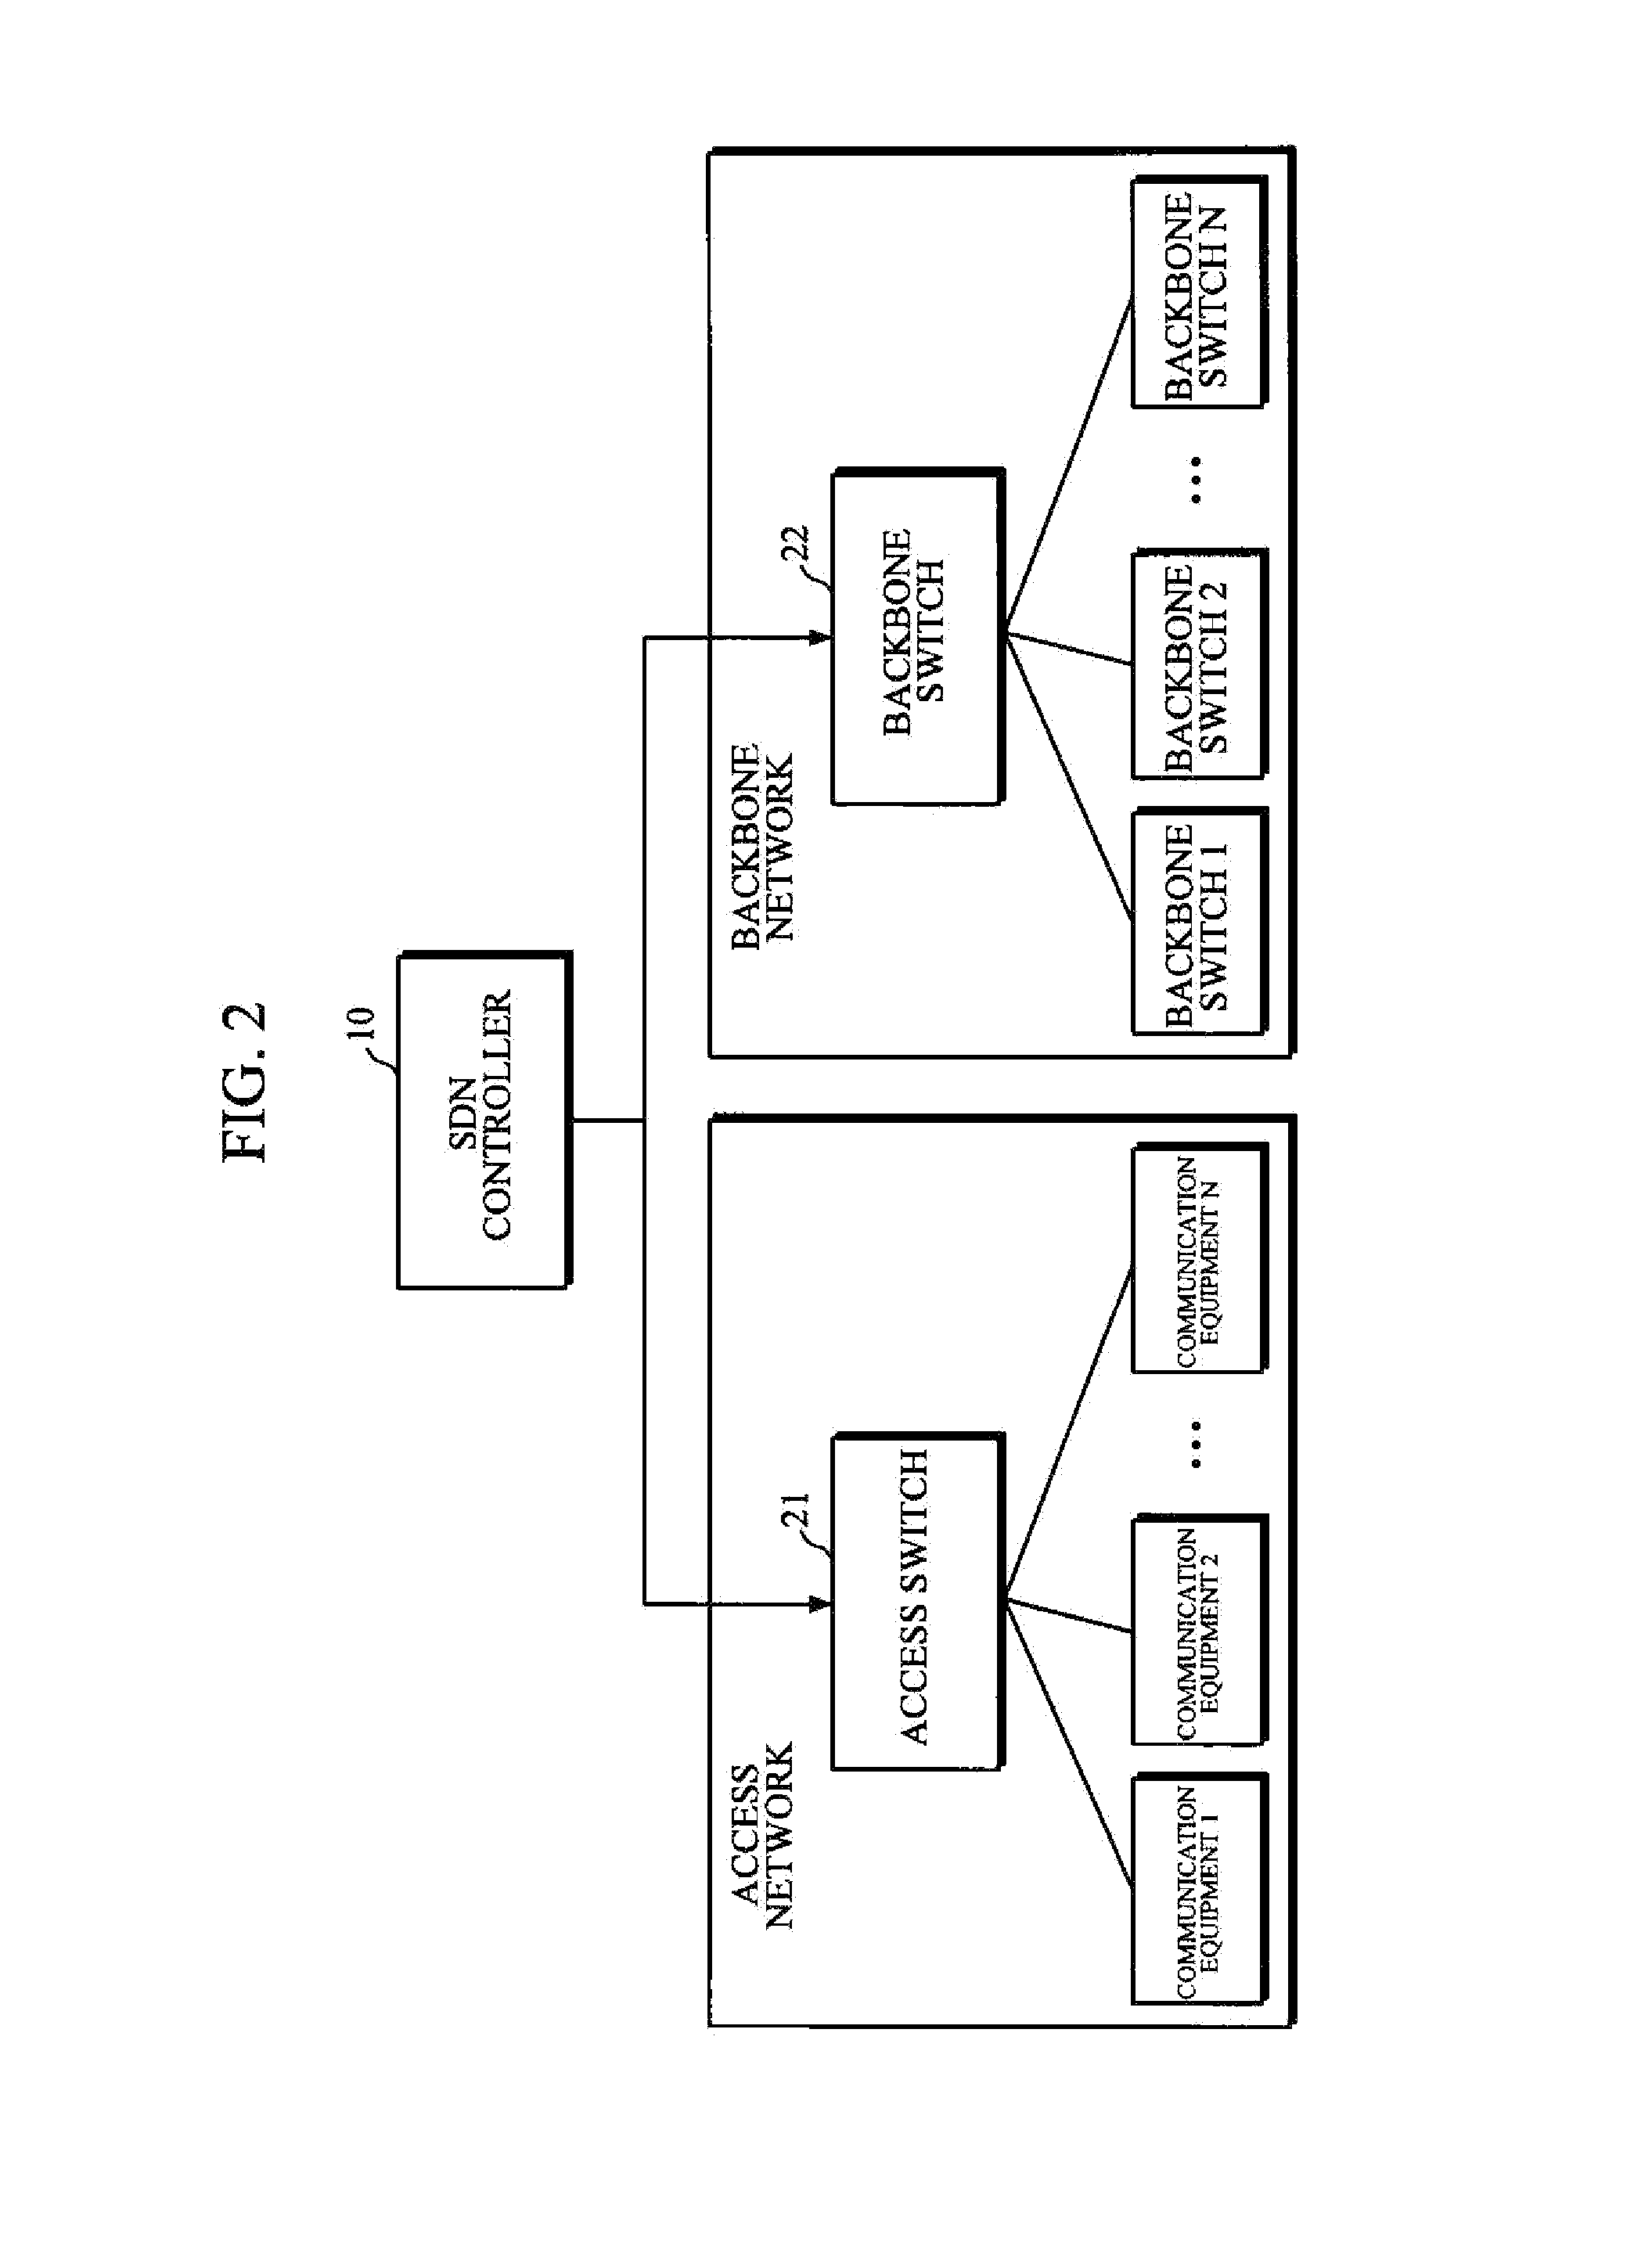 Apparauts and method for generating software defined network(SDN)-based virtual network according to user demand